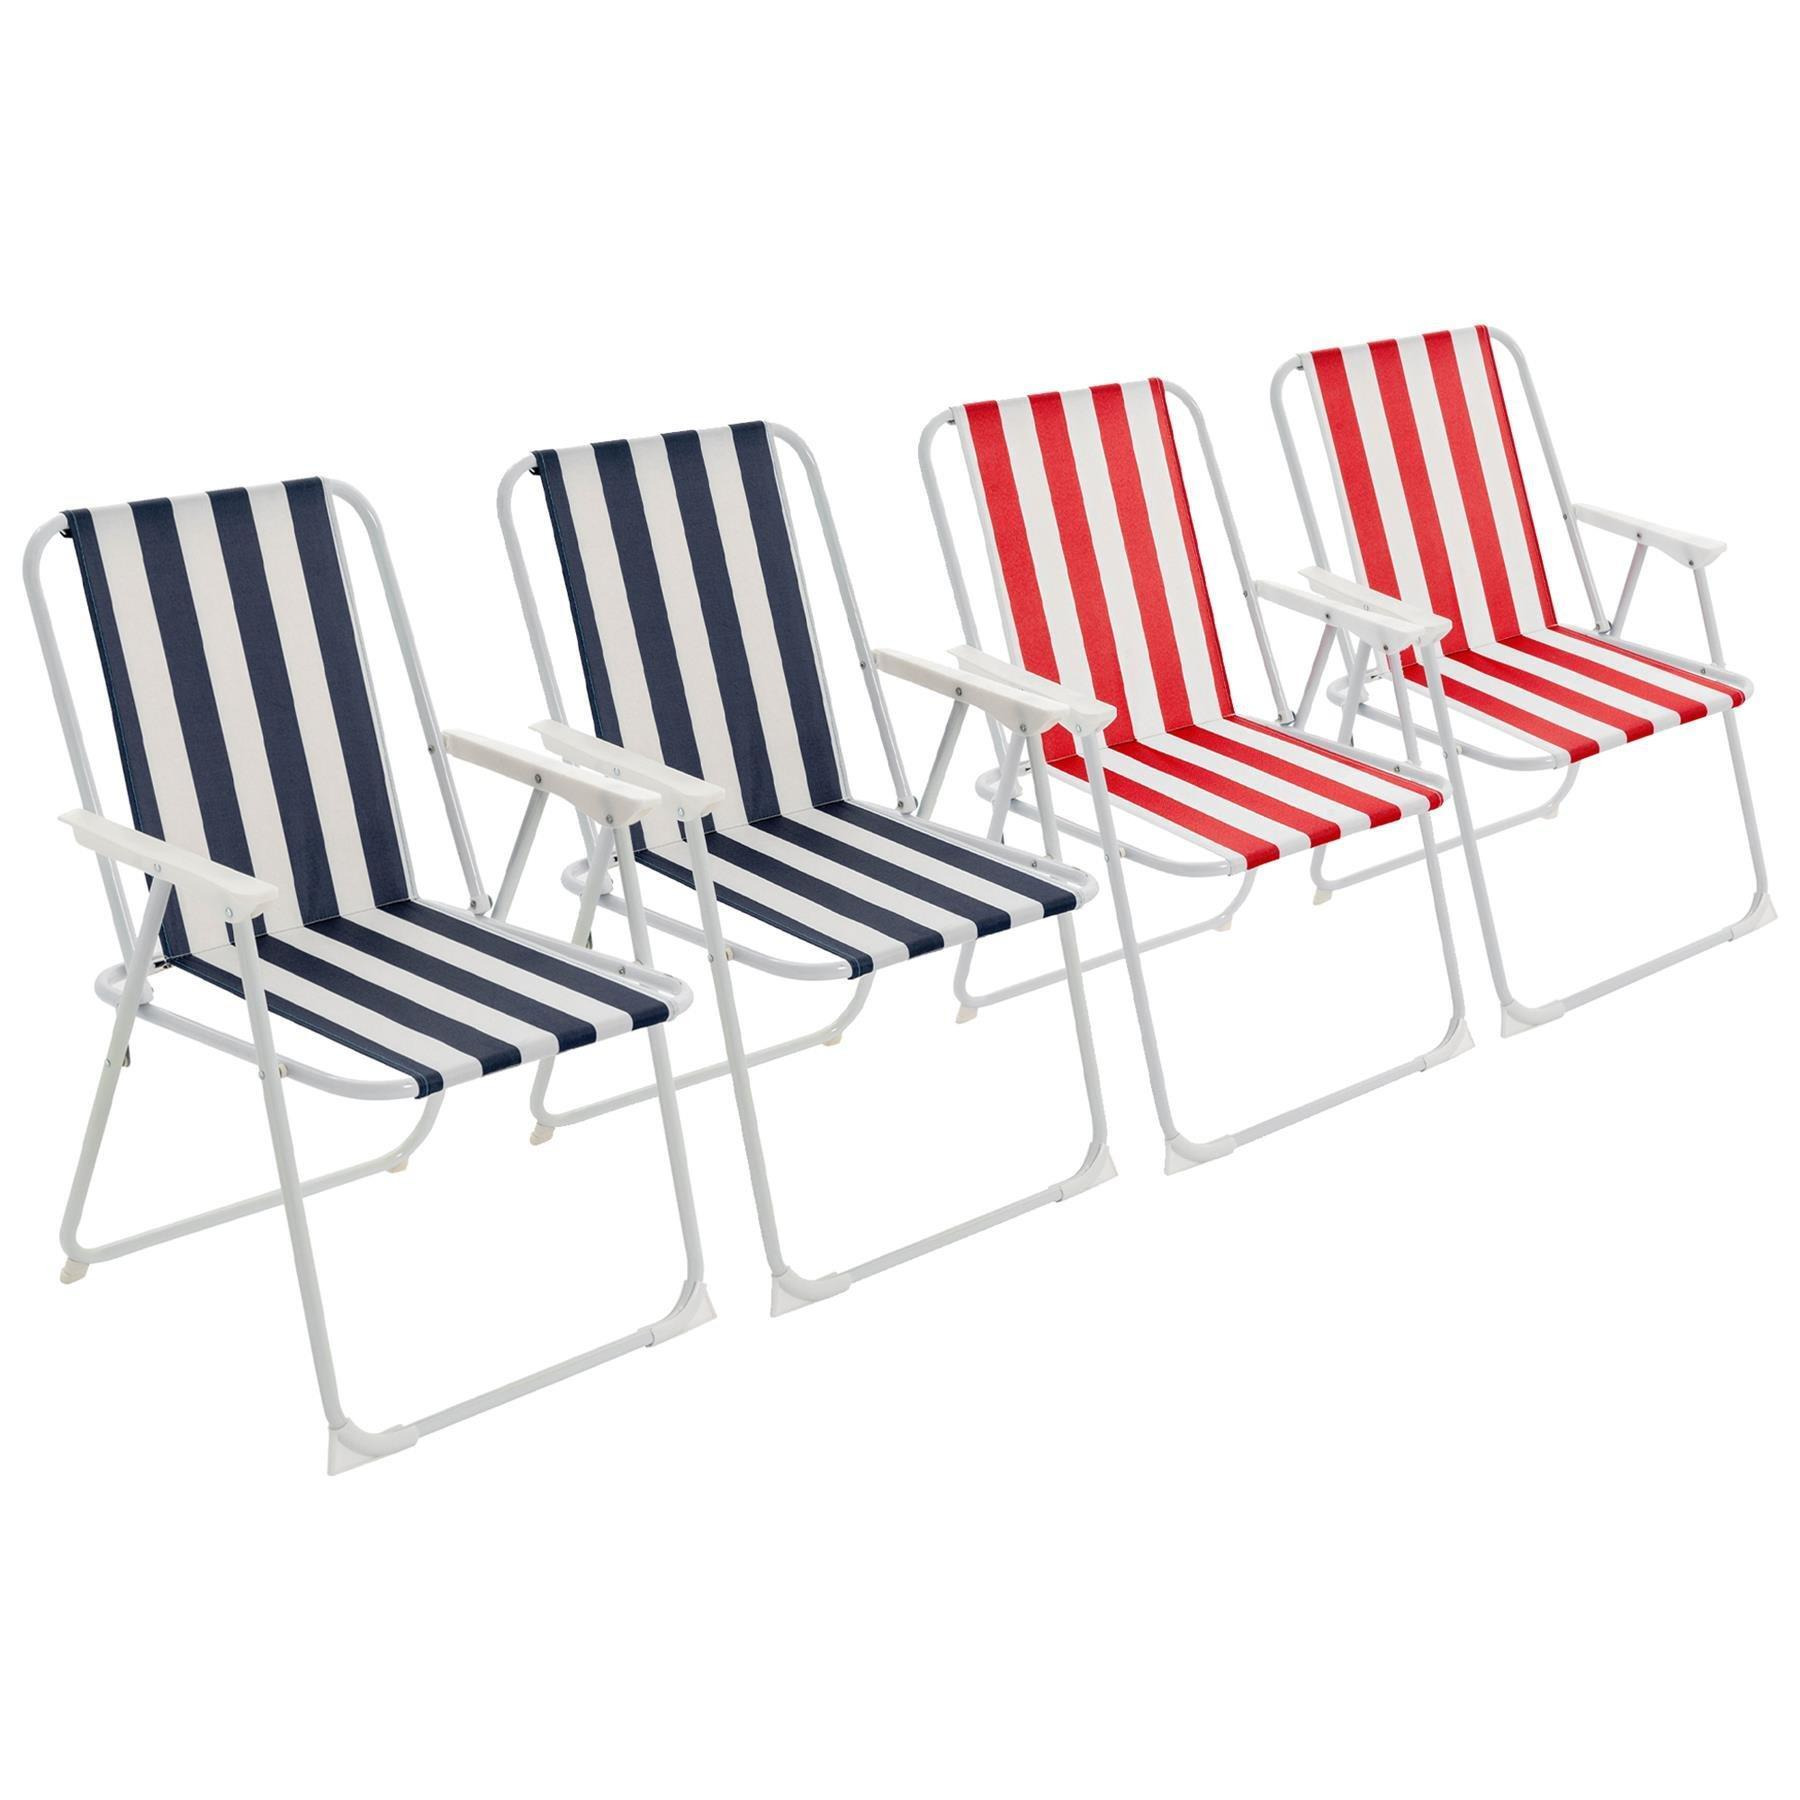 Folding Metal Beach Chairs Blue/Red Stripe Pack of 4 - image 1